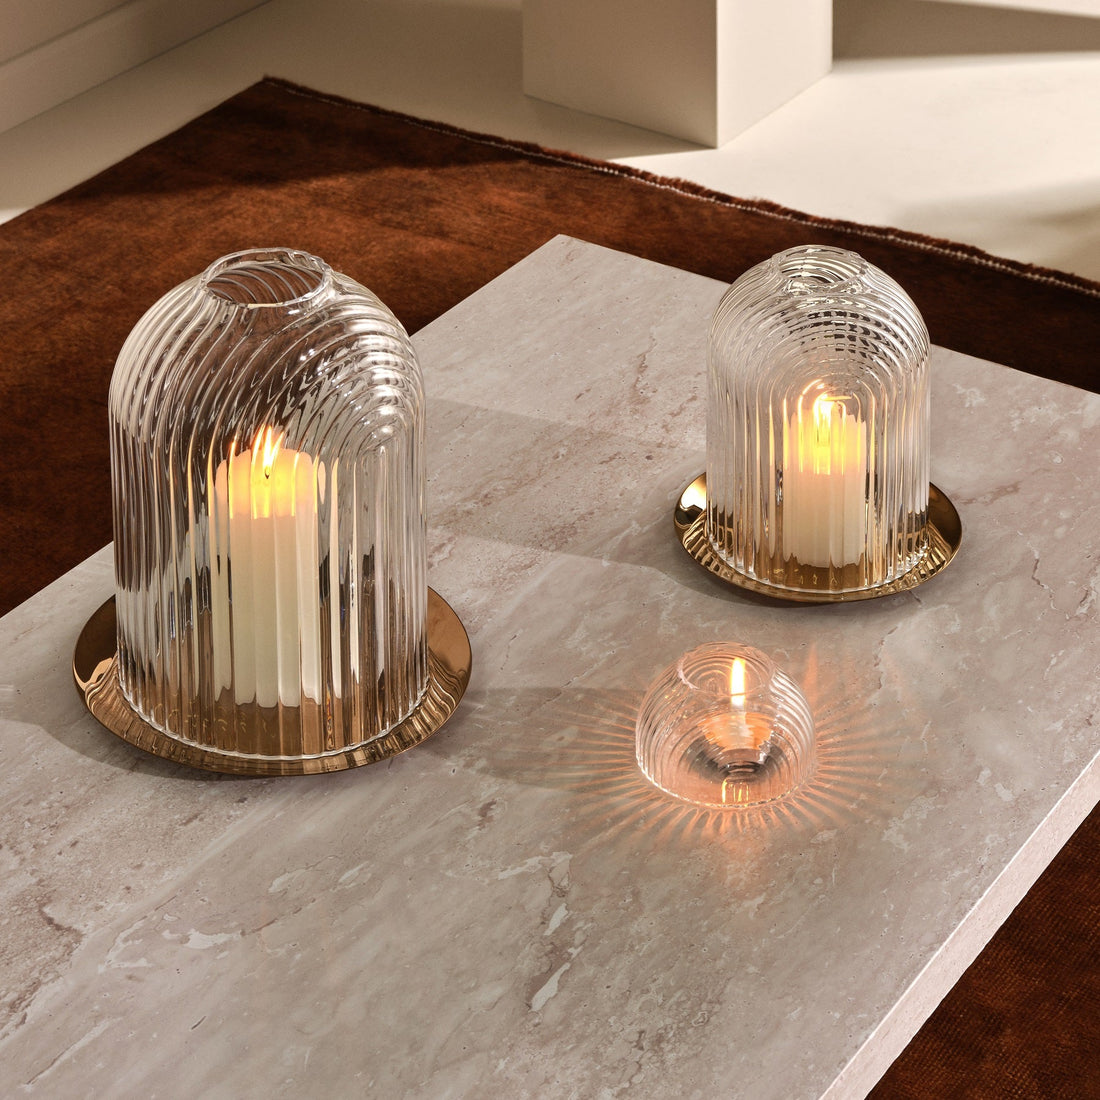 Lead-free crystal candle holder Ilo, a dome shaped candle holder with rippled glass effect, with candle presented on a table with the small version of candle holder and a votive version of similar design